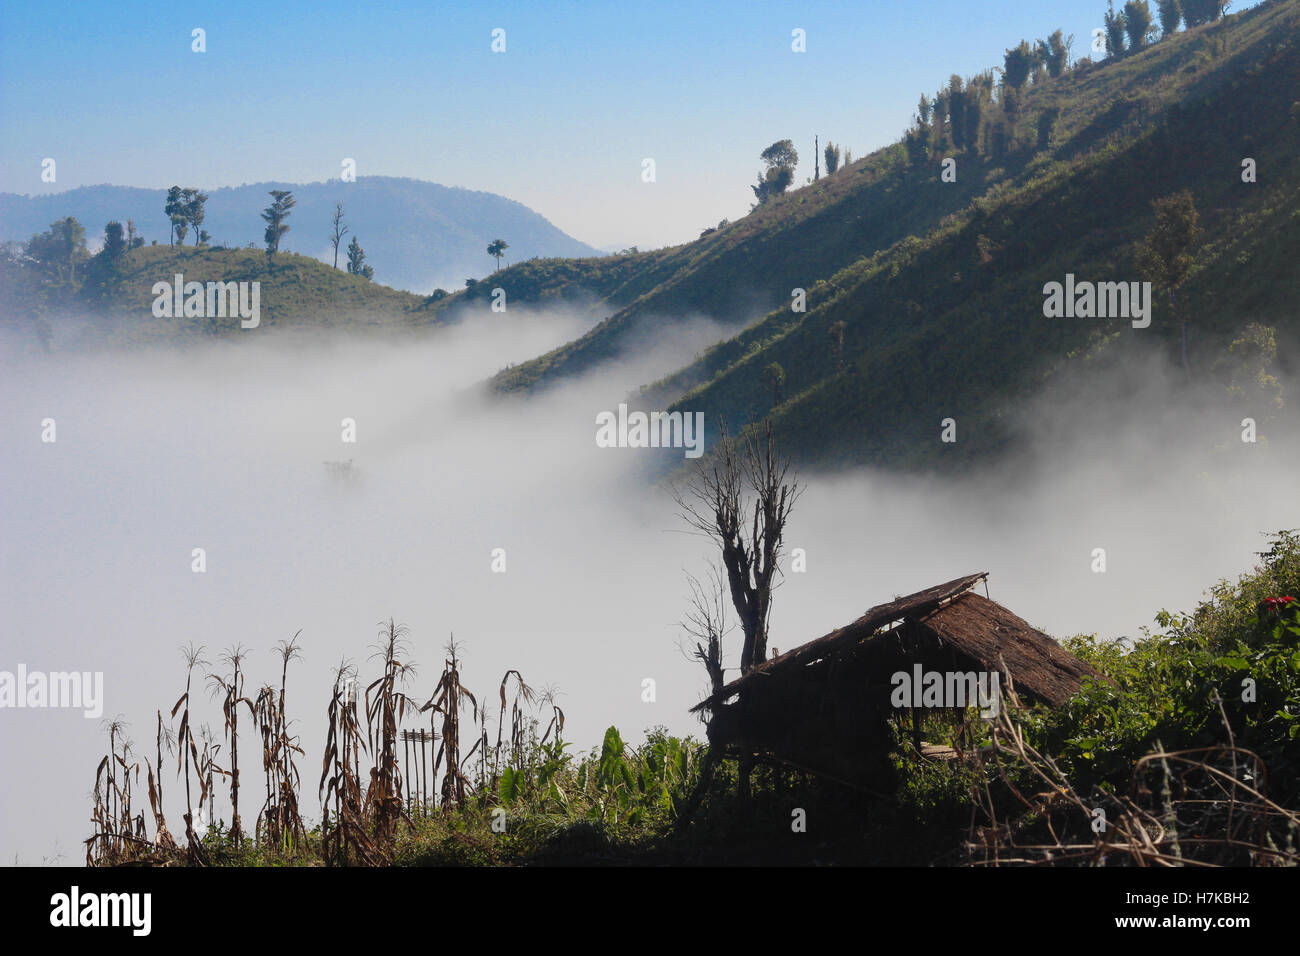 View of foggy mountain peaks surrounded by morning mist in Northern Thailand. Taken while on an eco tour hiking through Chaing Mai. Stock Photo